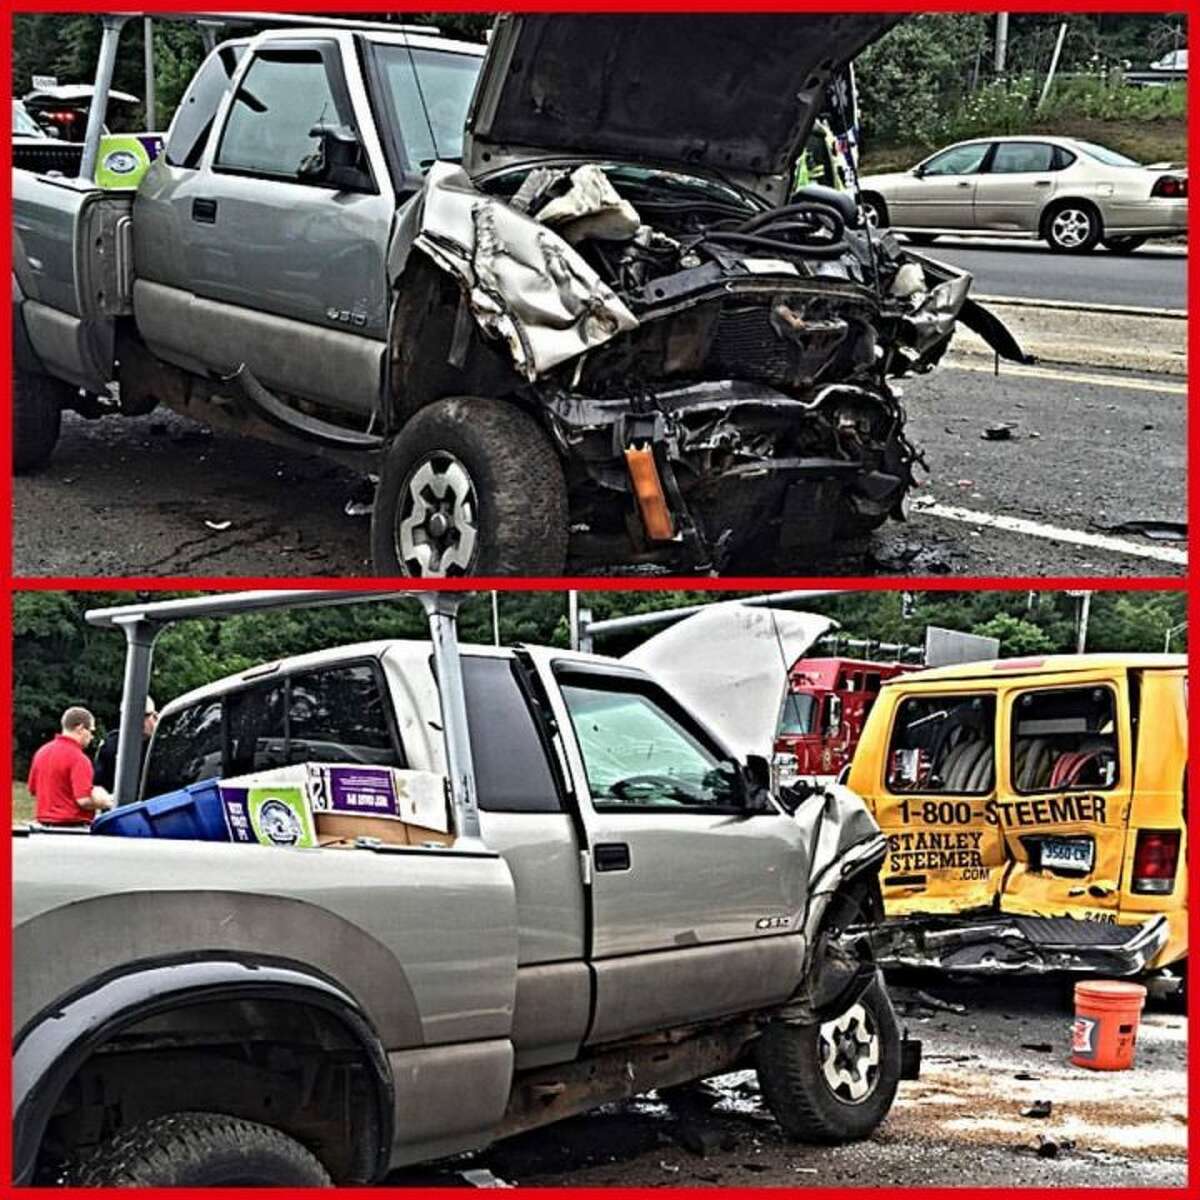 These two images show the damage from a multi-vehicle collision on Route 25 and Route 111 last weekend. Long Hill Volunteer Fire Co. #1 Inc. photos